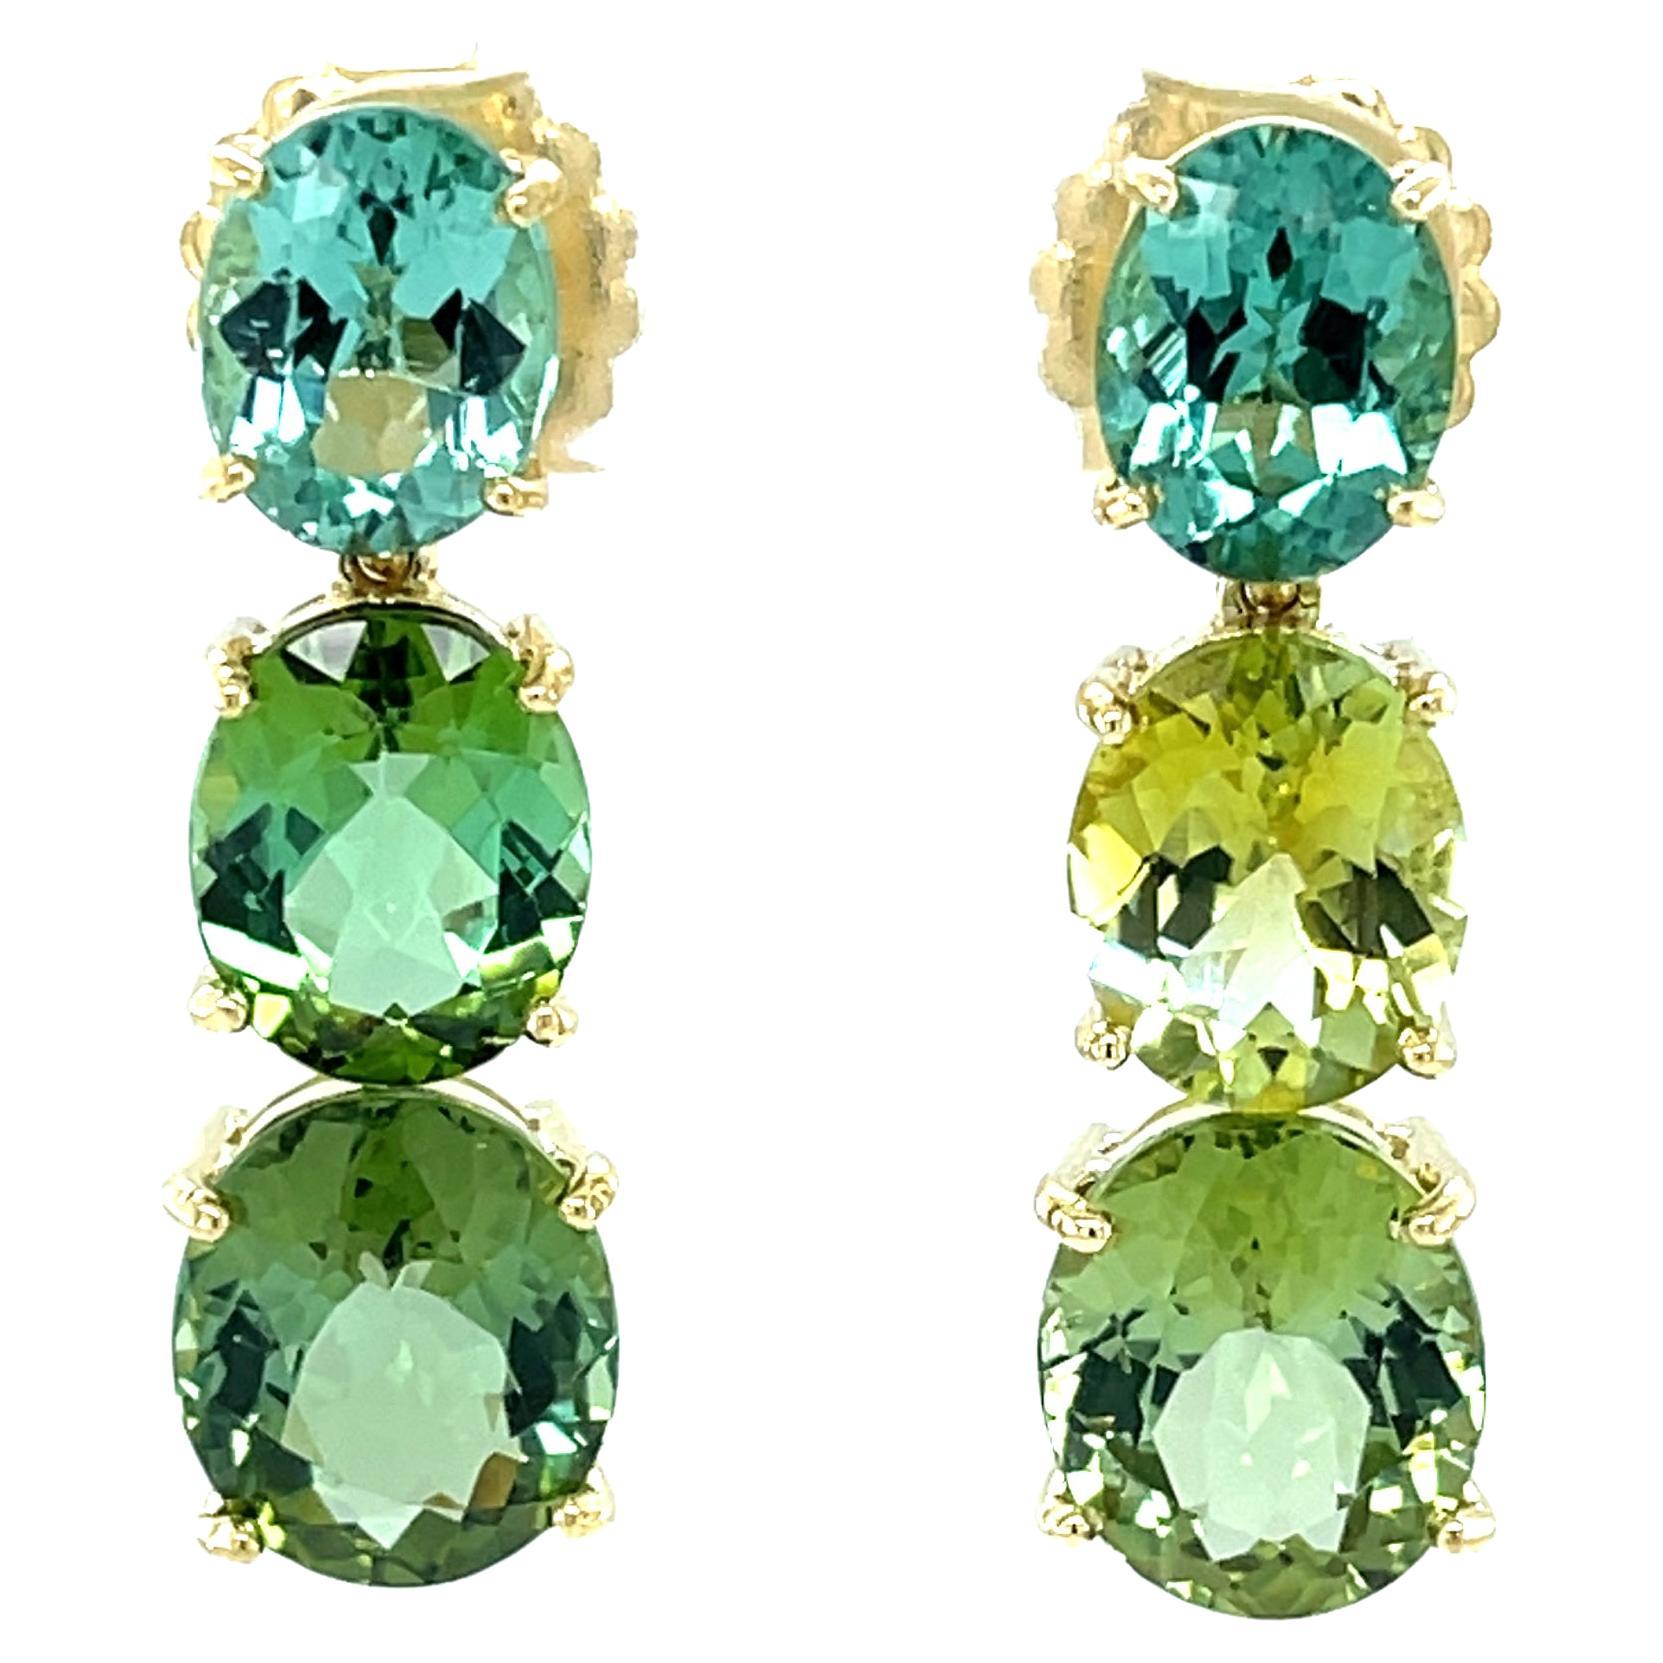 Green Multicolored Tourmaline and Yellow Gold Dangle Earrings, 19 Carats Total